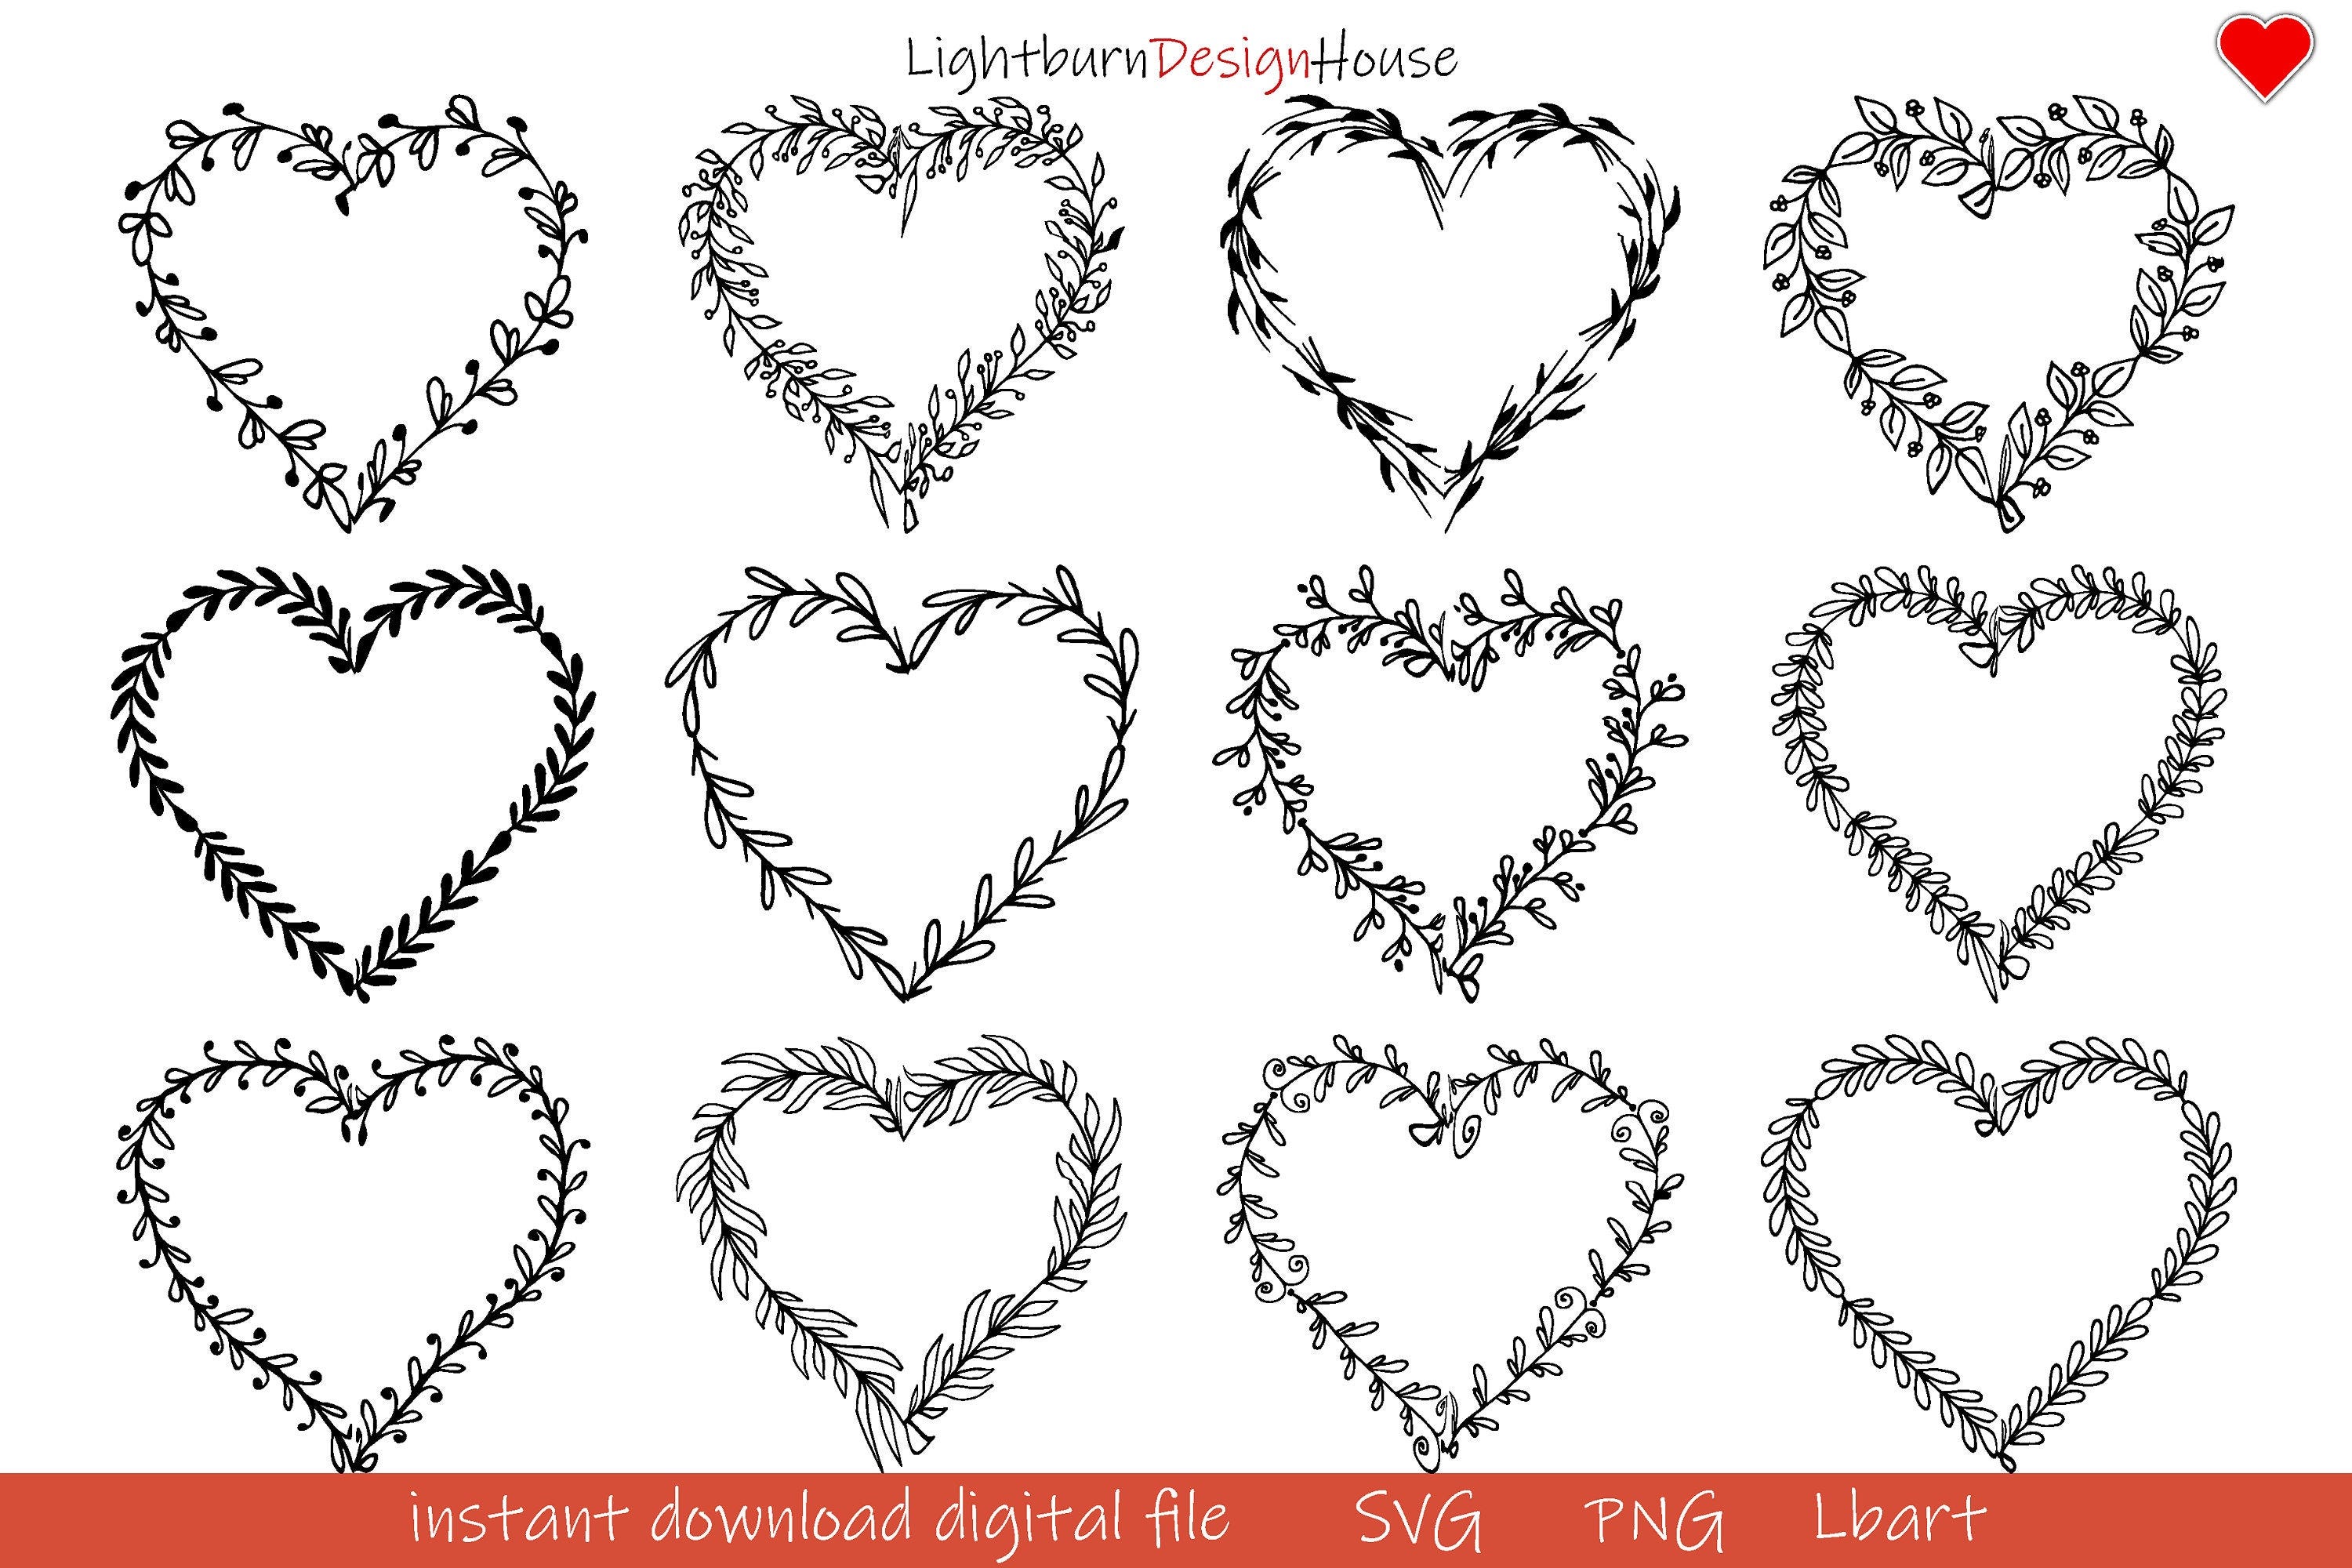 150 SVG Png Heart Wreath and Floral Leafy Vector Bundle Patterns For Laser Lightburn Art LLibrary Files, Merry Christmas Circle Frame wreath